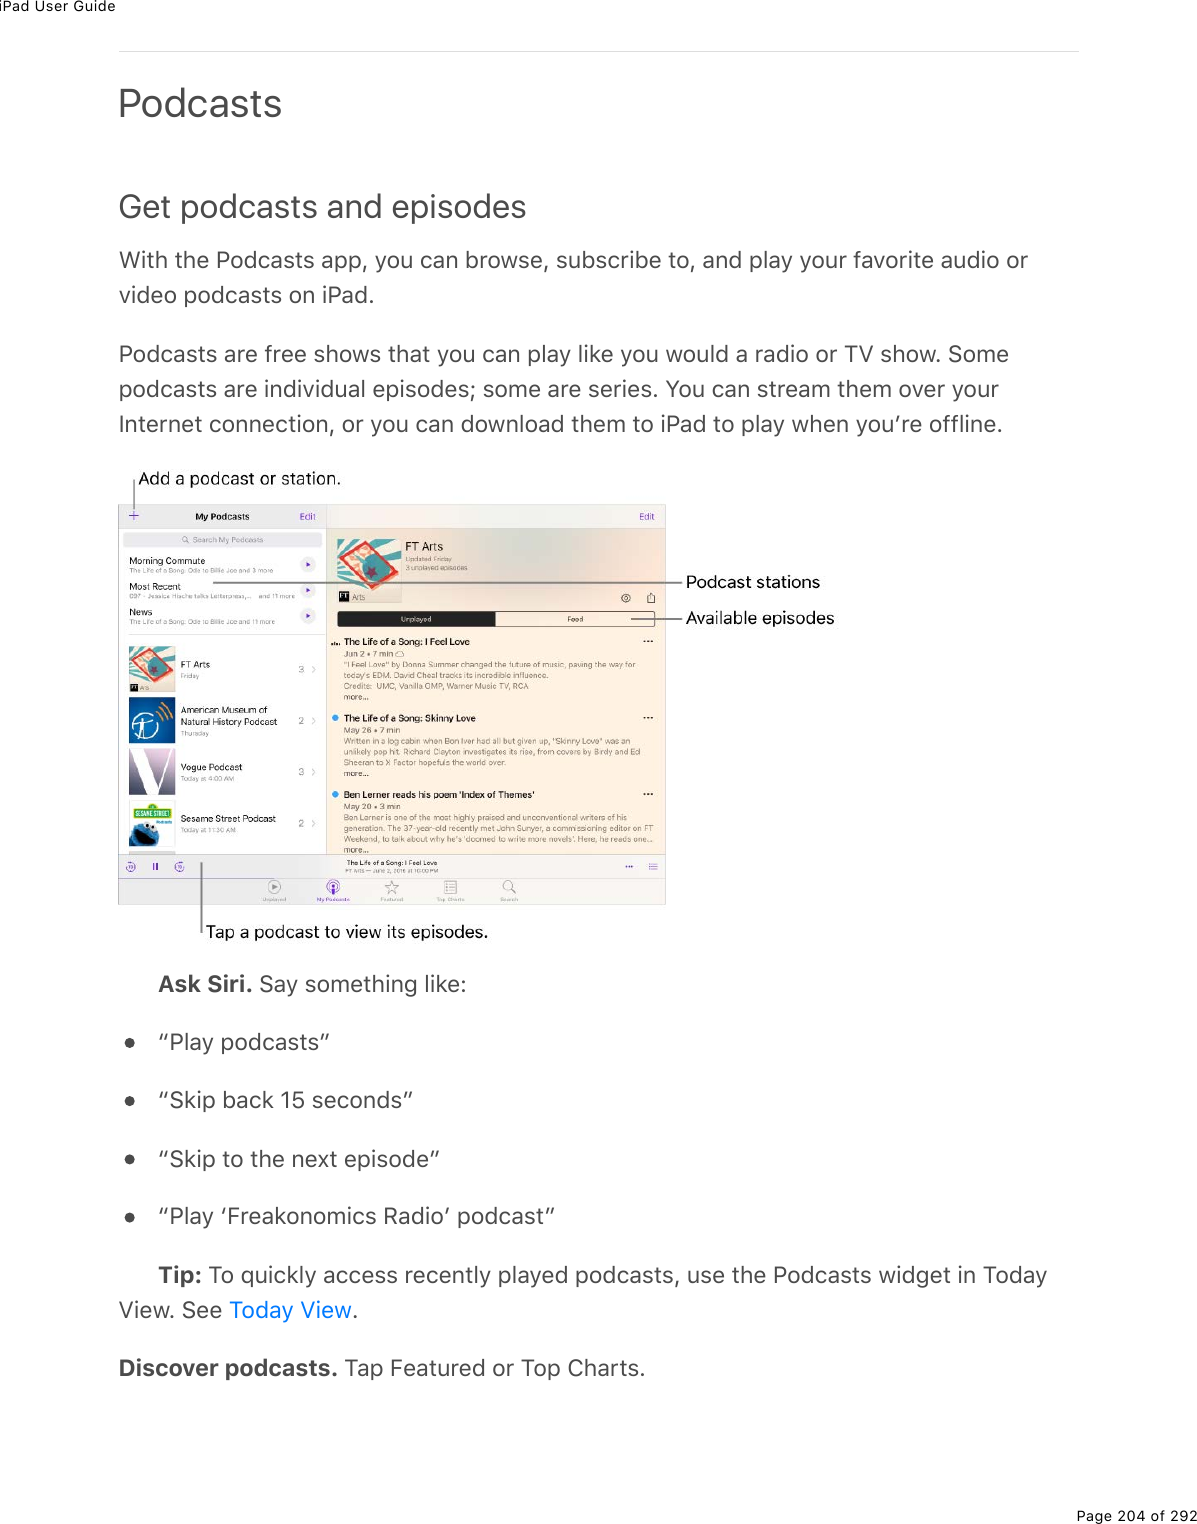 iPad User GuidePage 204 of 292PodcastsGet podcasts and episodes&lt;.&quot;*%&quot;*(%@27)#&amp;&quot;&amp;%#--L%=2&gt;%)#0%5$21&amp;(L%&amp;&gt;5&amp;)$.5(%&quot;2L%#07%-3#=%=2&gt;$%9#D2$.&quot;(%#&gt;7.2%2$D.7(2%-27)#&amp;&quot;&amp;%20%.@#7E@27)#&amp;&quot;&amp;%#$(%9$((%&amp;*21&amp;%&quot;*#&quot;%=2&gt;%)#0%-3#=%3.&apos;(%=2&gt;%12&gt;37%#%$#7.2%2$%MT%&amp;*21E%!2/(-27)#&amp;&quot;&amp;%#$(%.07.D.7&gt;#3%(-.&amp;27(&amp;j%&amp;2/(%#$(%&amp;($.(&amp;E%Y2&gt;%)#0%&amp;&quot;$(#/%&quot;*(/%2D($%=2&gt;$S0&quot;($0(&quot;%)200()&quot;.20L%2$%=2&gt;%)#0%721032#7%&quot;*(/%&quot;2%.@#7%&quot;2%-3#=%1*(0%=2&gt;F$(%2993.0(EAsk Siri. !#=%&amp;2/(&quot;*.0;%3.&apos;(Ob@3#=%-27)#&amp;&quot;&amp;cb!&apos;.-%5#)&apos;%H^%&amp;()207&amp;cb!&apos;.-%&quot;2%&quot;*(%0(,&quot;%(-.&amp;27(cb@3#=%vB$(#&apos;202/.)&amp;%:#7.2F%-27)#&amp;&quot;cTip: M2%]&gt;.)&apos;3=%#))(&amp;&amp;%$()(0&quot;3=%-3#=(7%-27)#&amp;&quot;&amp;L%&gt;&amp;(%&quot;*(%@27)#&amp;&quot;&amp;%1.7;(&quot;%.0%M27#=T.(1E%!((% EDiscover podcasts. M#-%B(#&quot;&gt;$(7%2$%M2-%4*#$&quot;&amp;EM27#=%T.(1